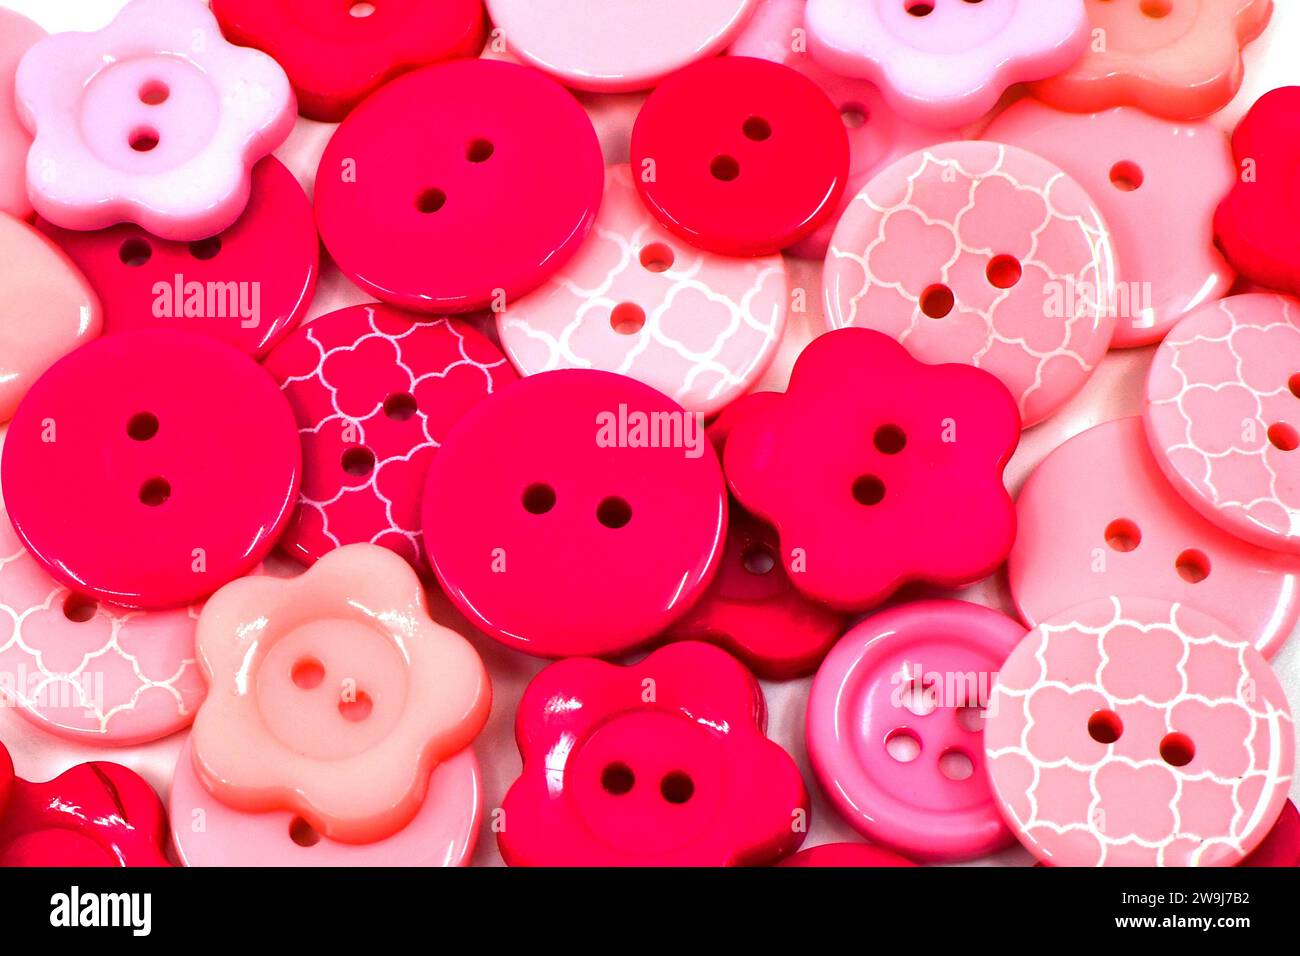 Close up view of pink and red plastic buttons. Craft concept. Backgrounds. Stock Photo